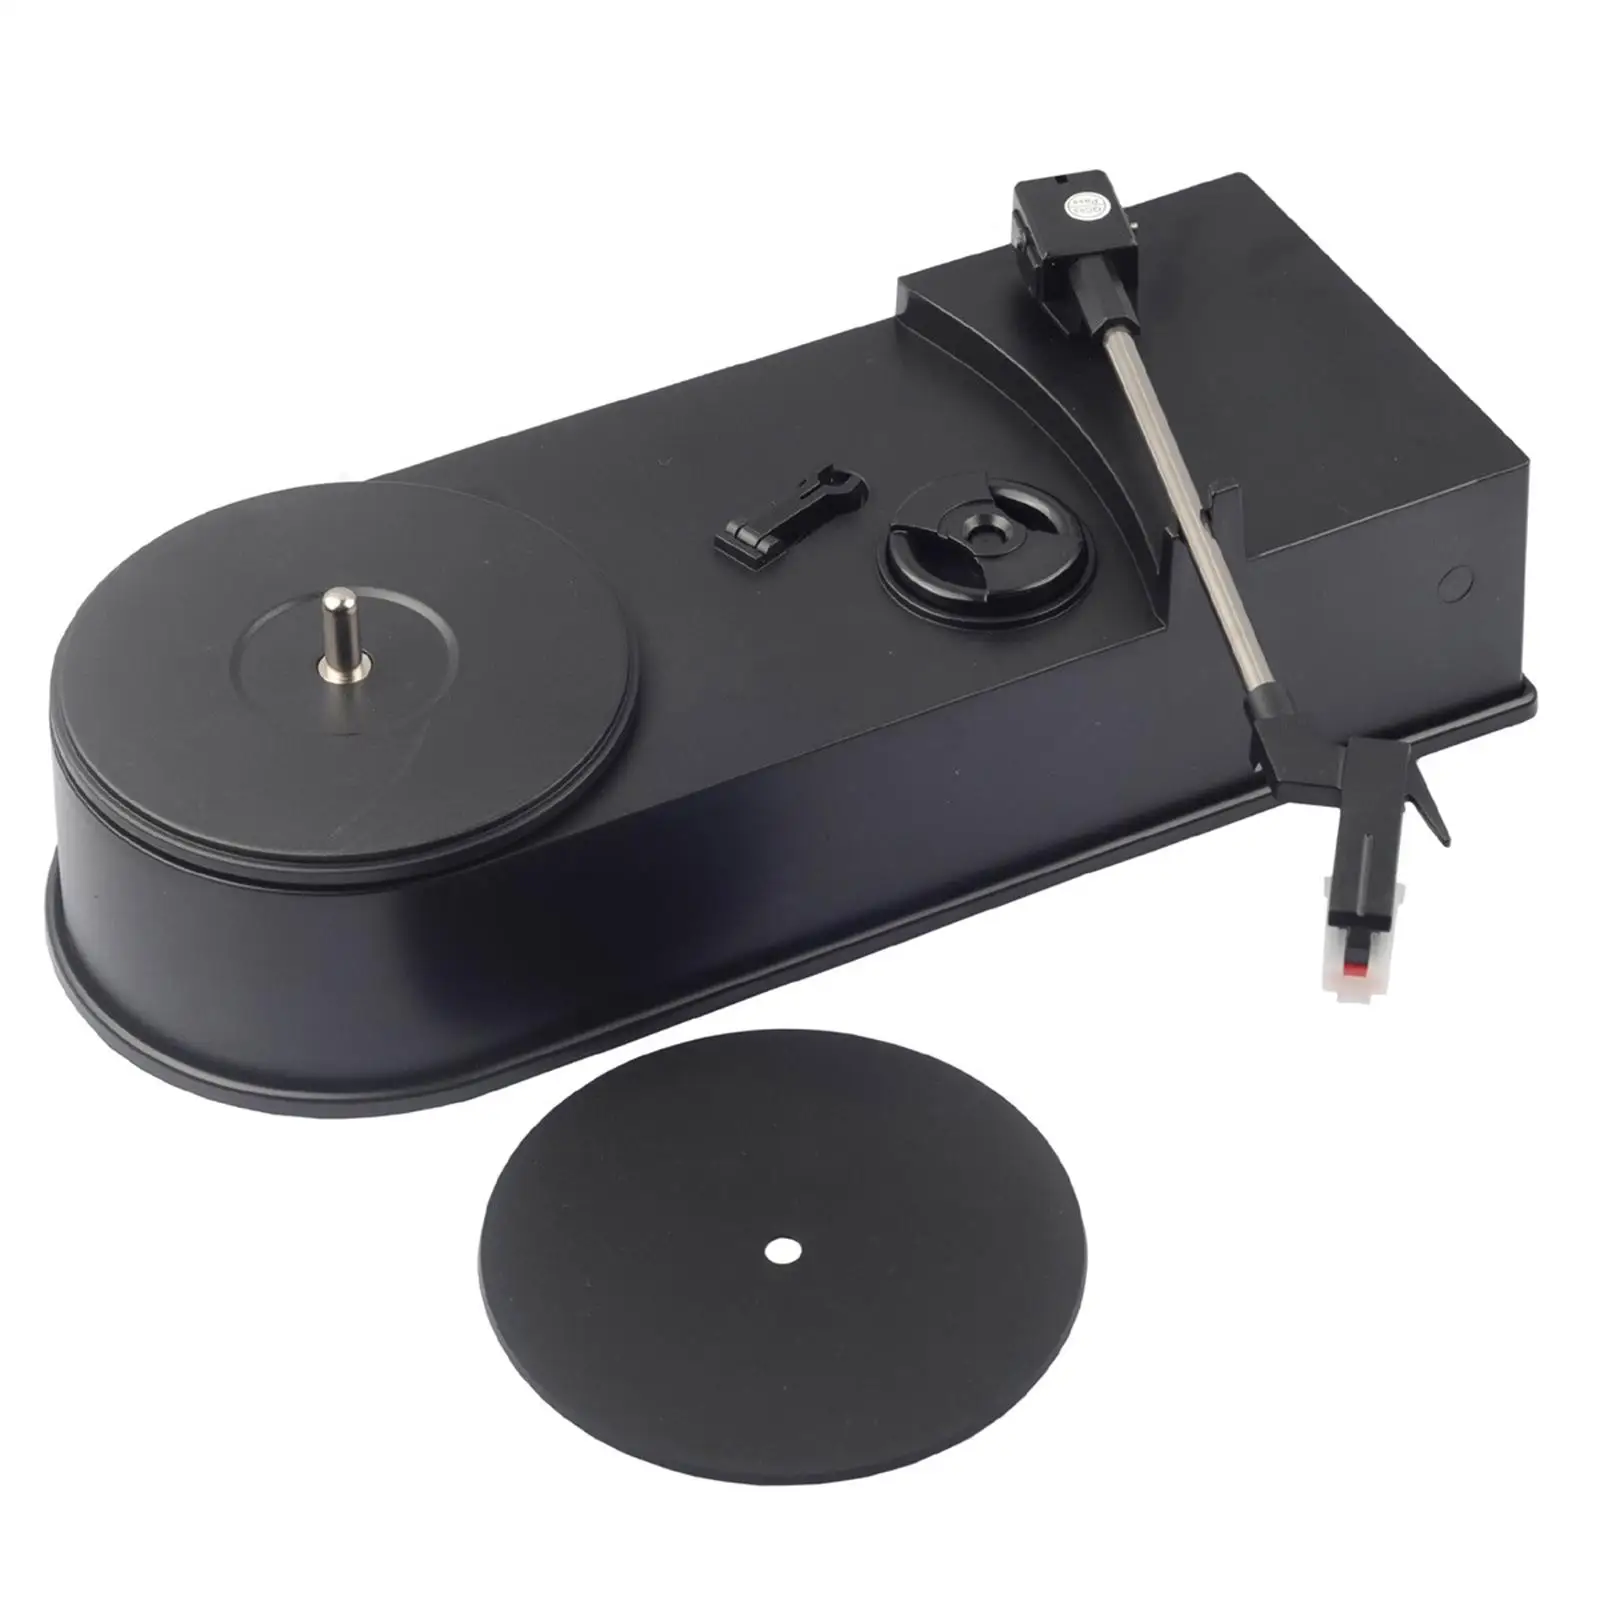 USB Turntable Record Player to MP3/WAV Plug Speeds Audio Player for Home Recording